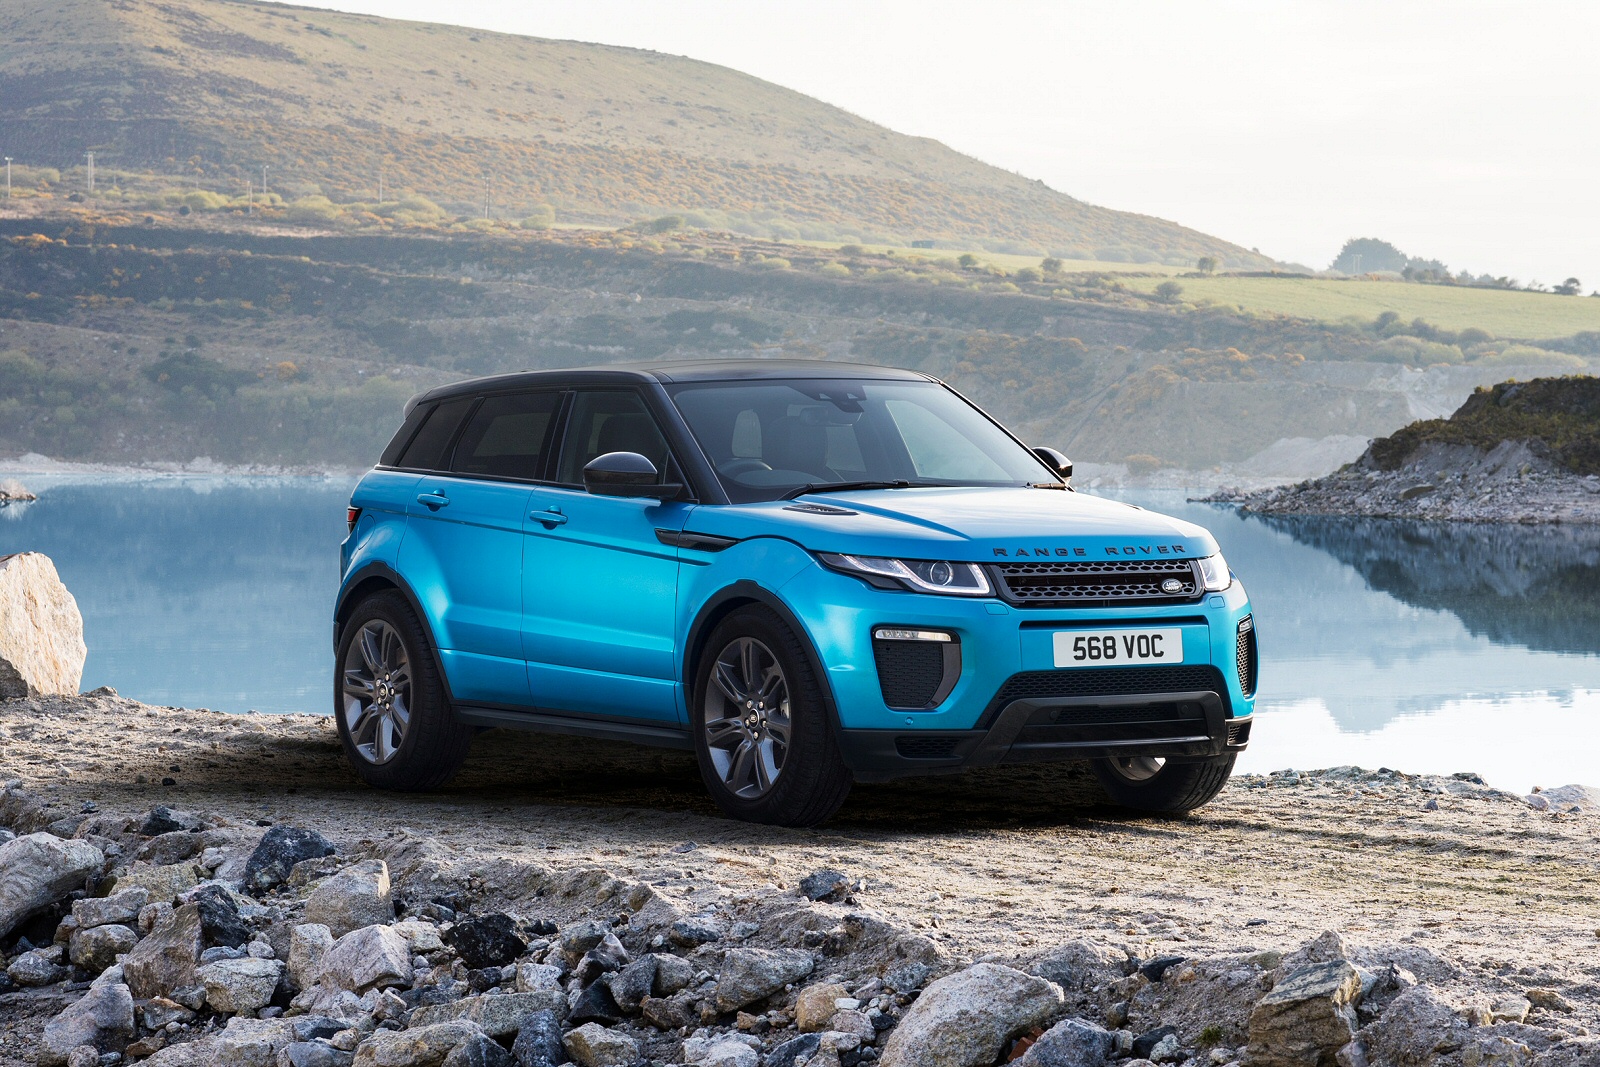 Top 5 Features of the Range Rover Evoque